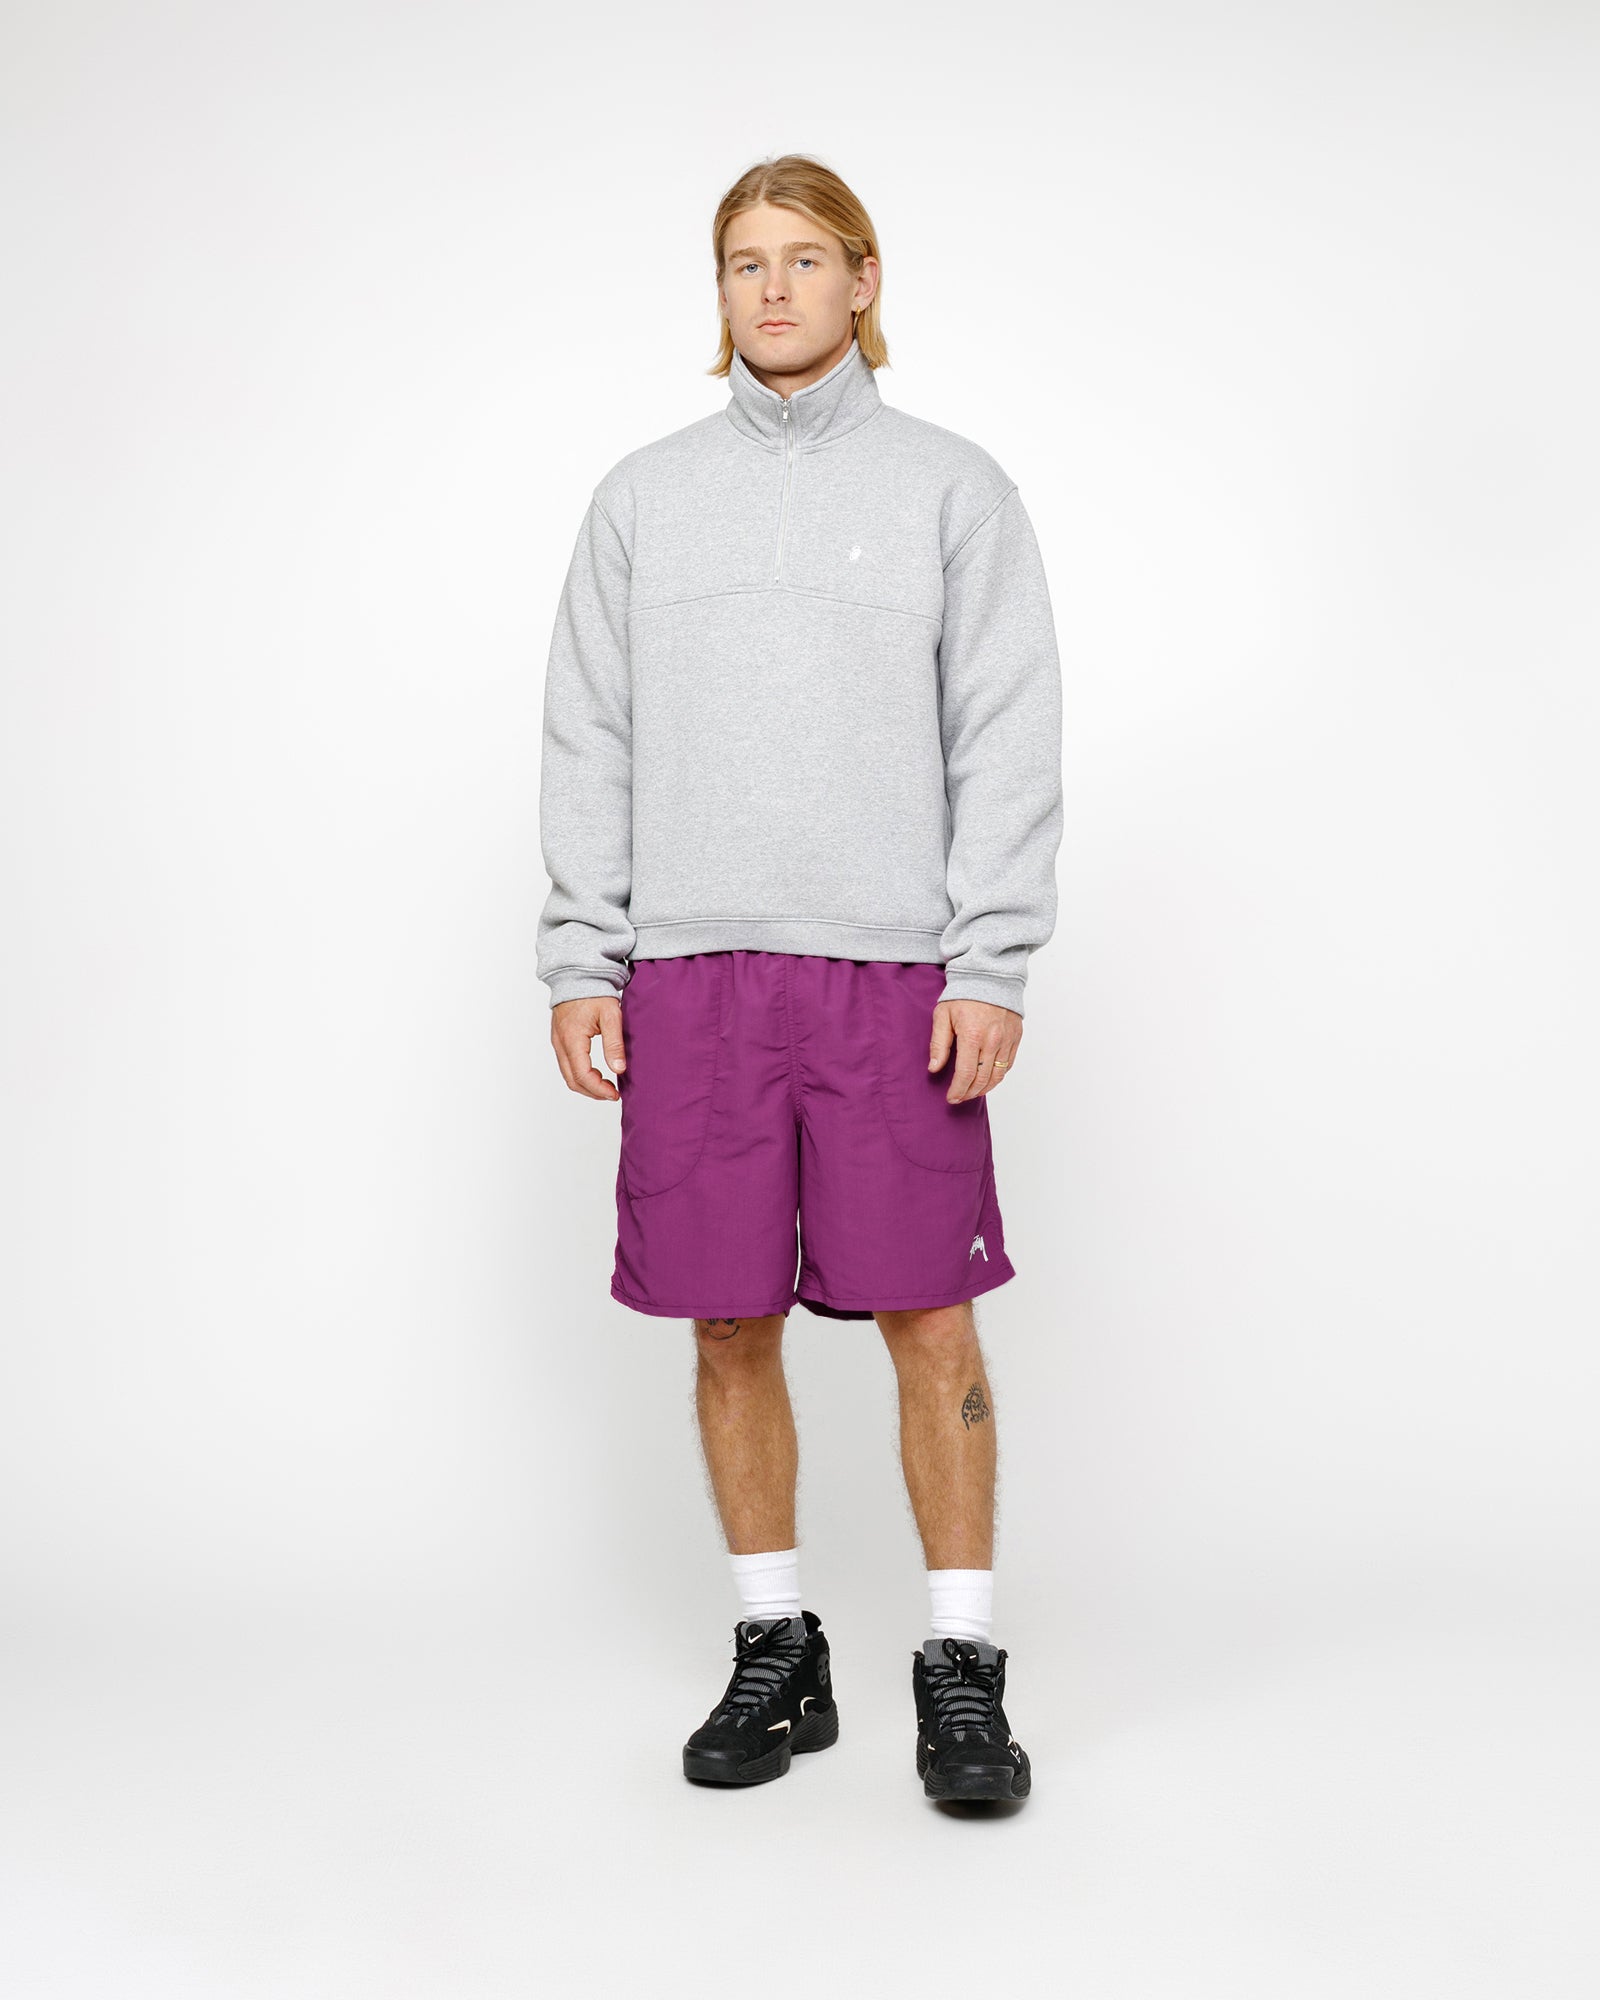 STUSSY WATER SHORT STOCK ORCHID BOTTOMS